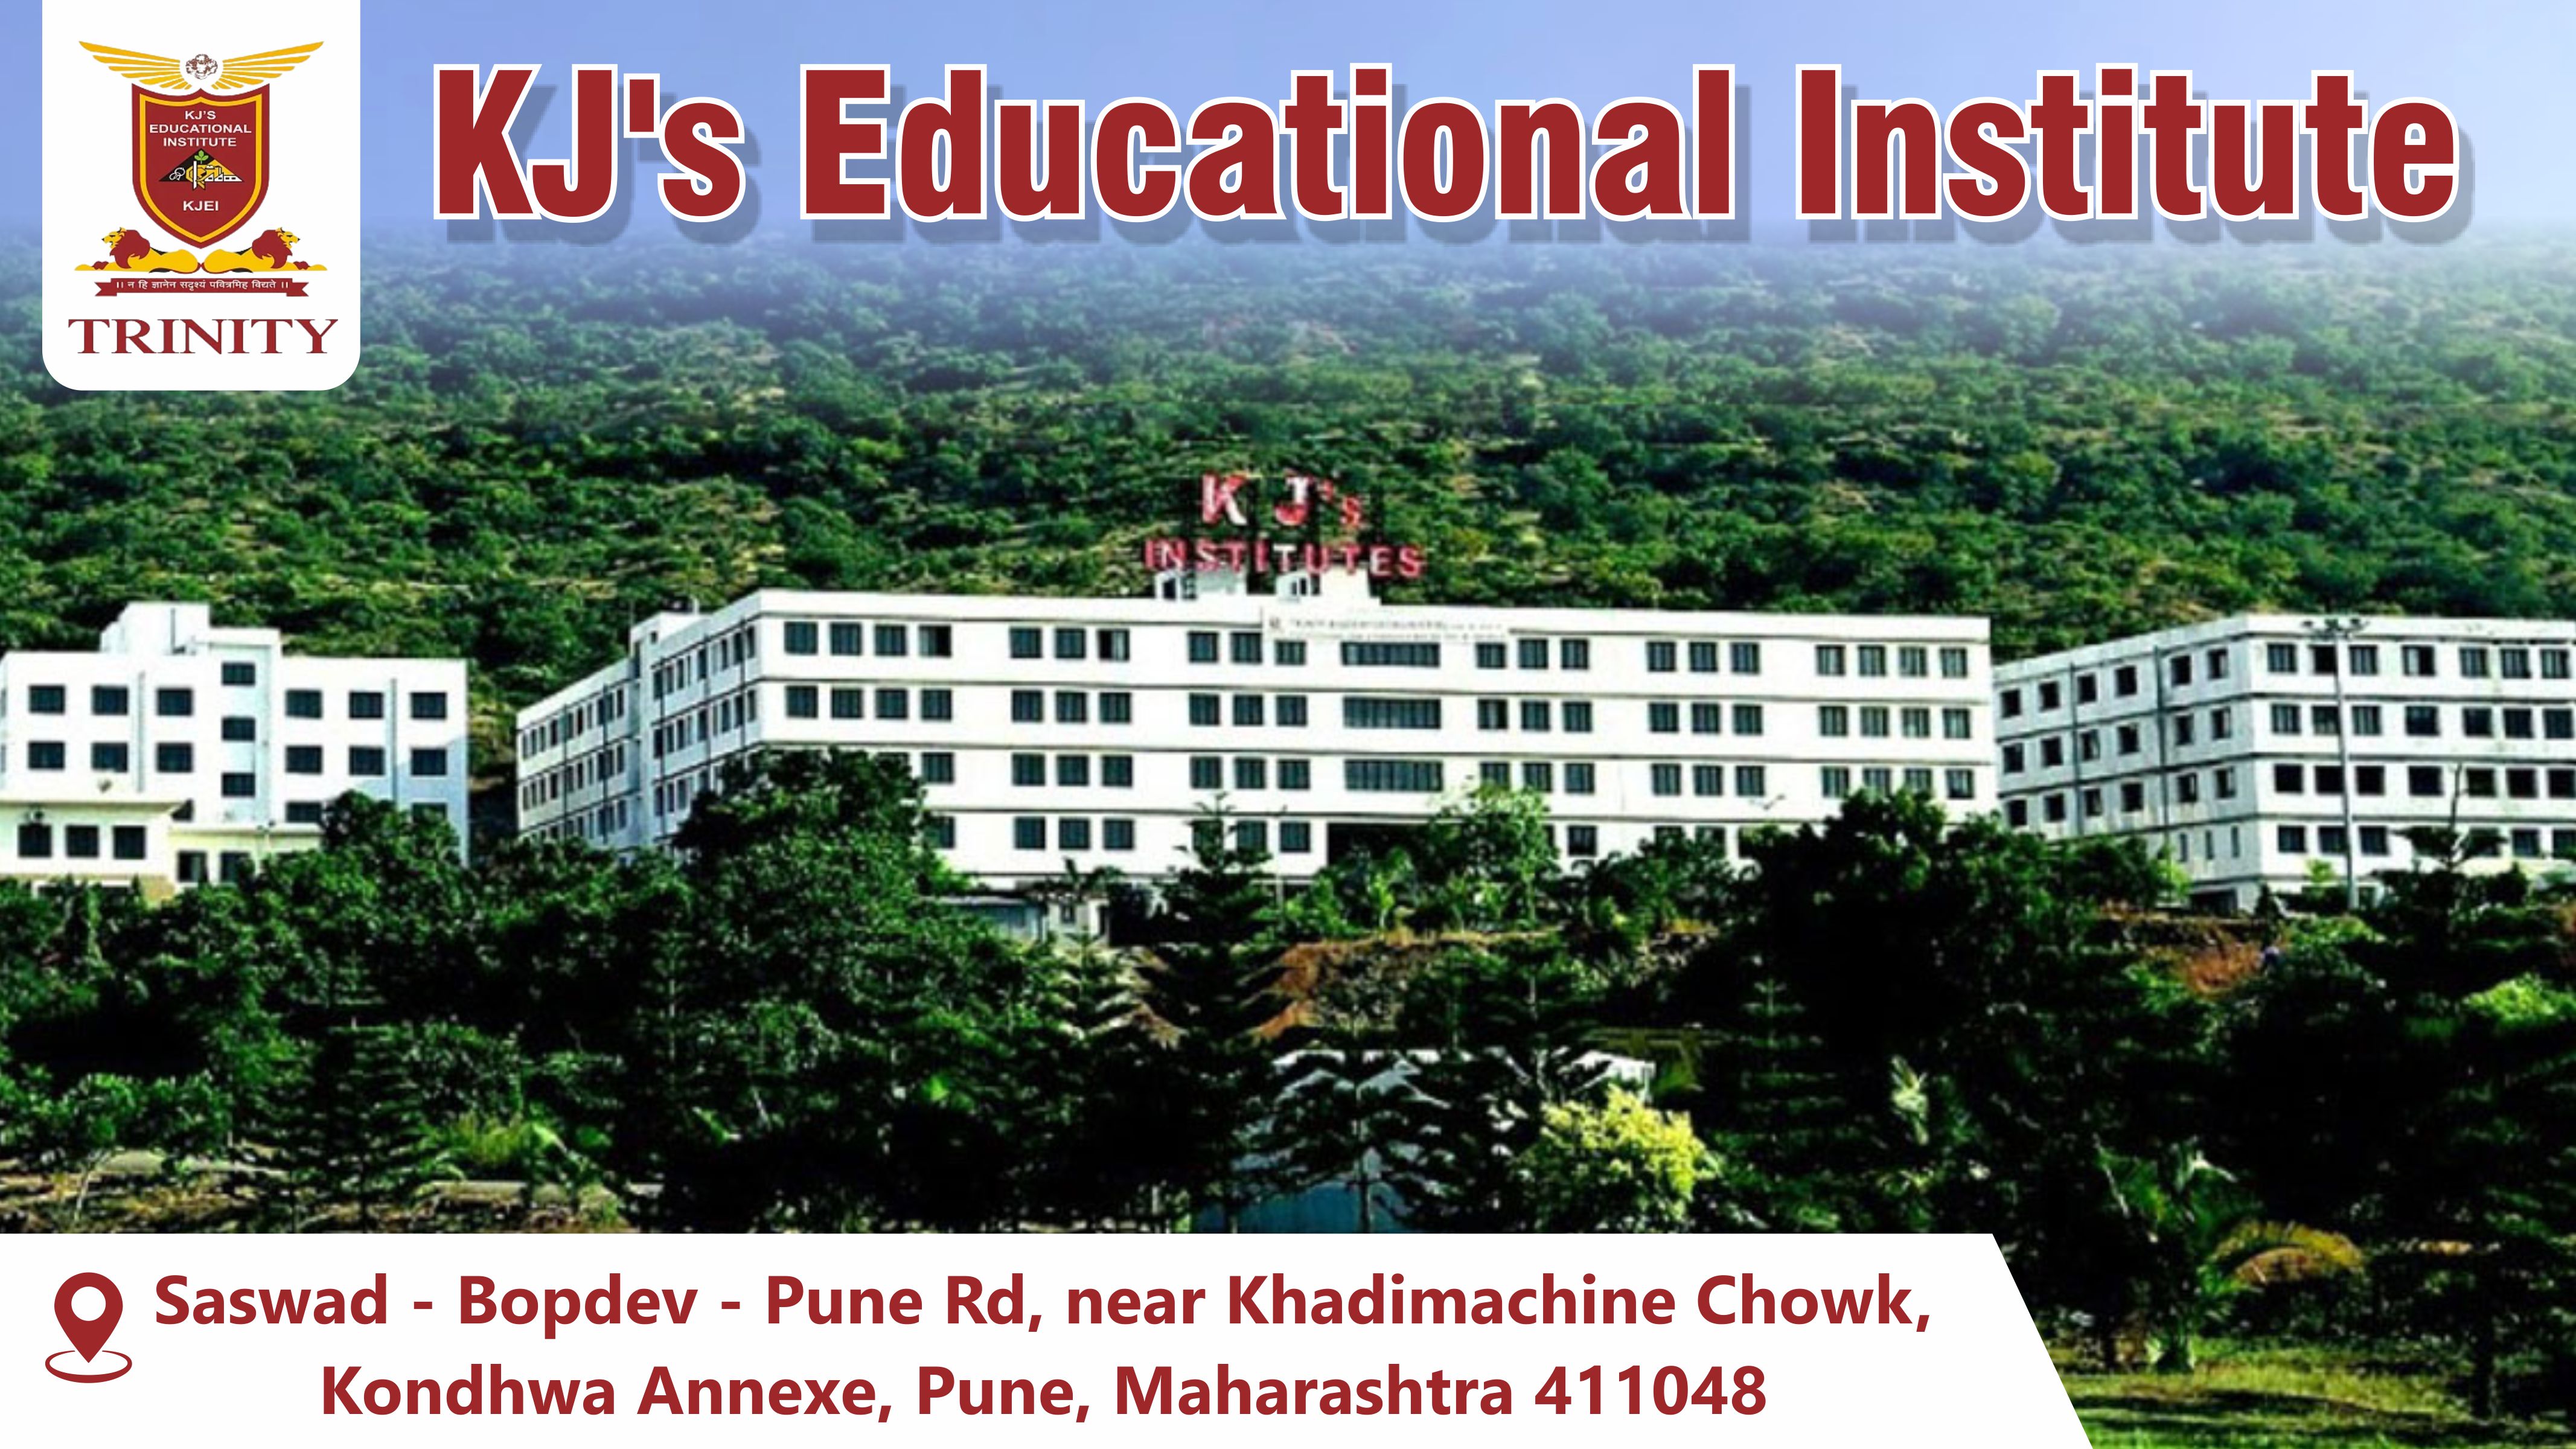 out side view of KJs Educational Institute